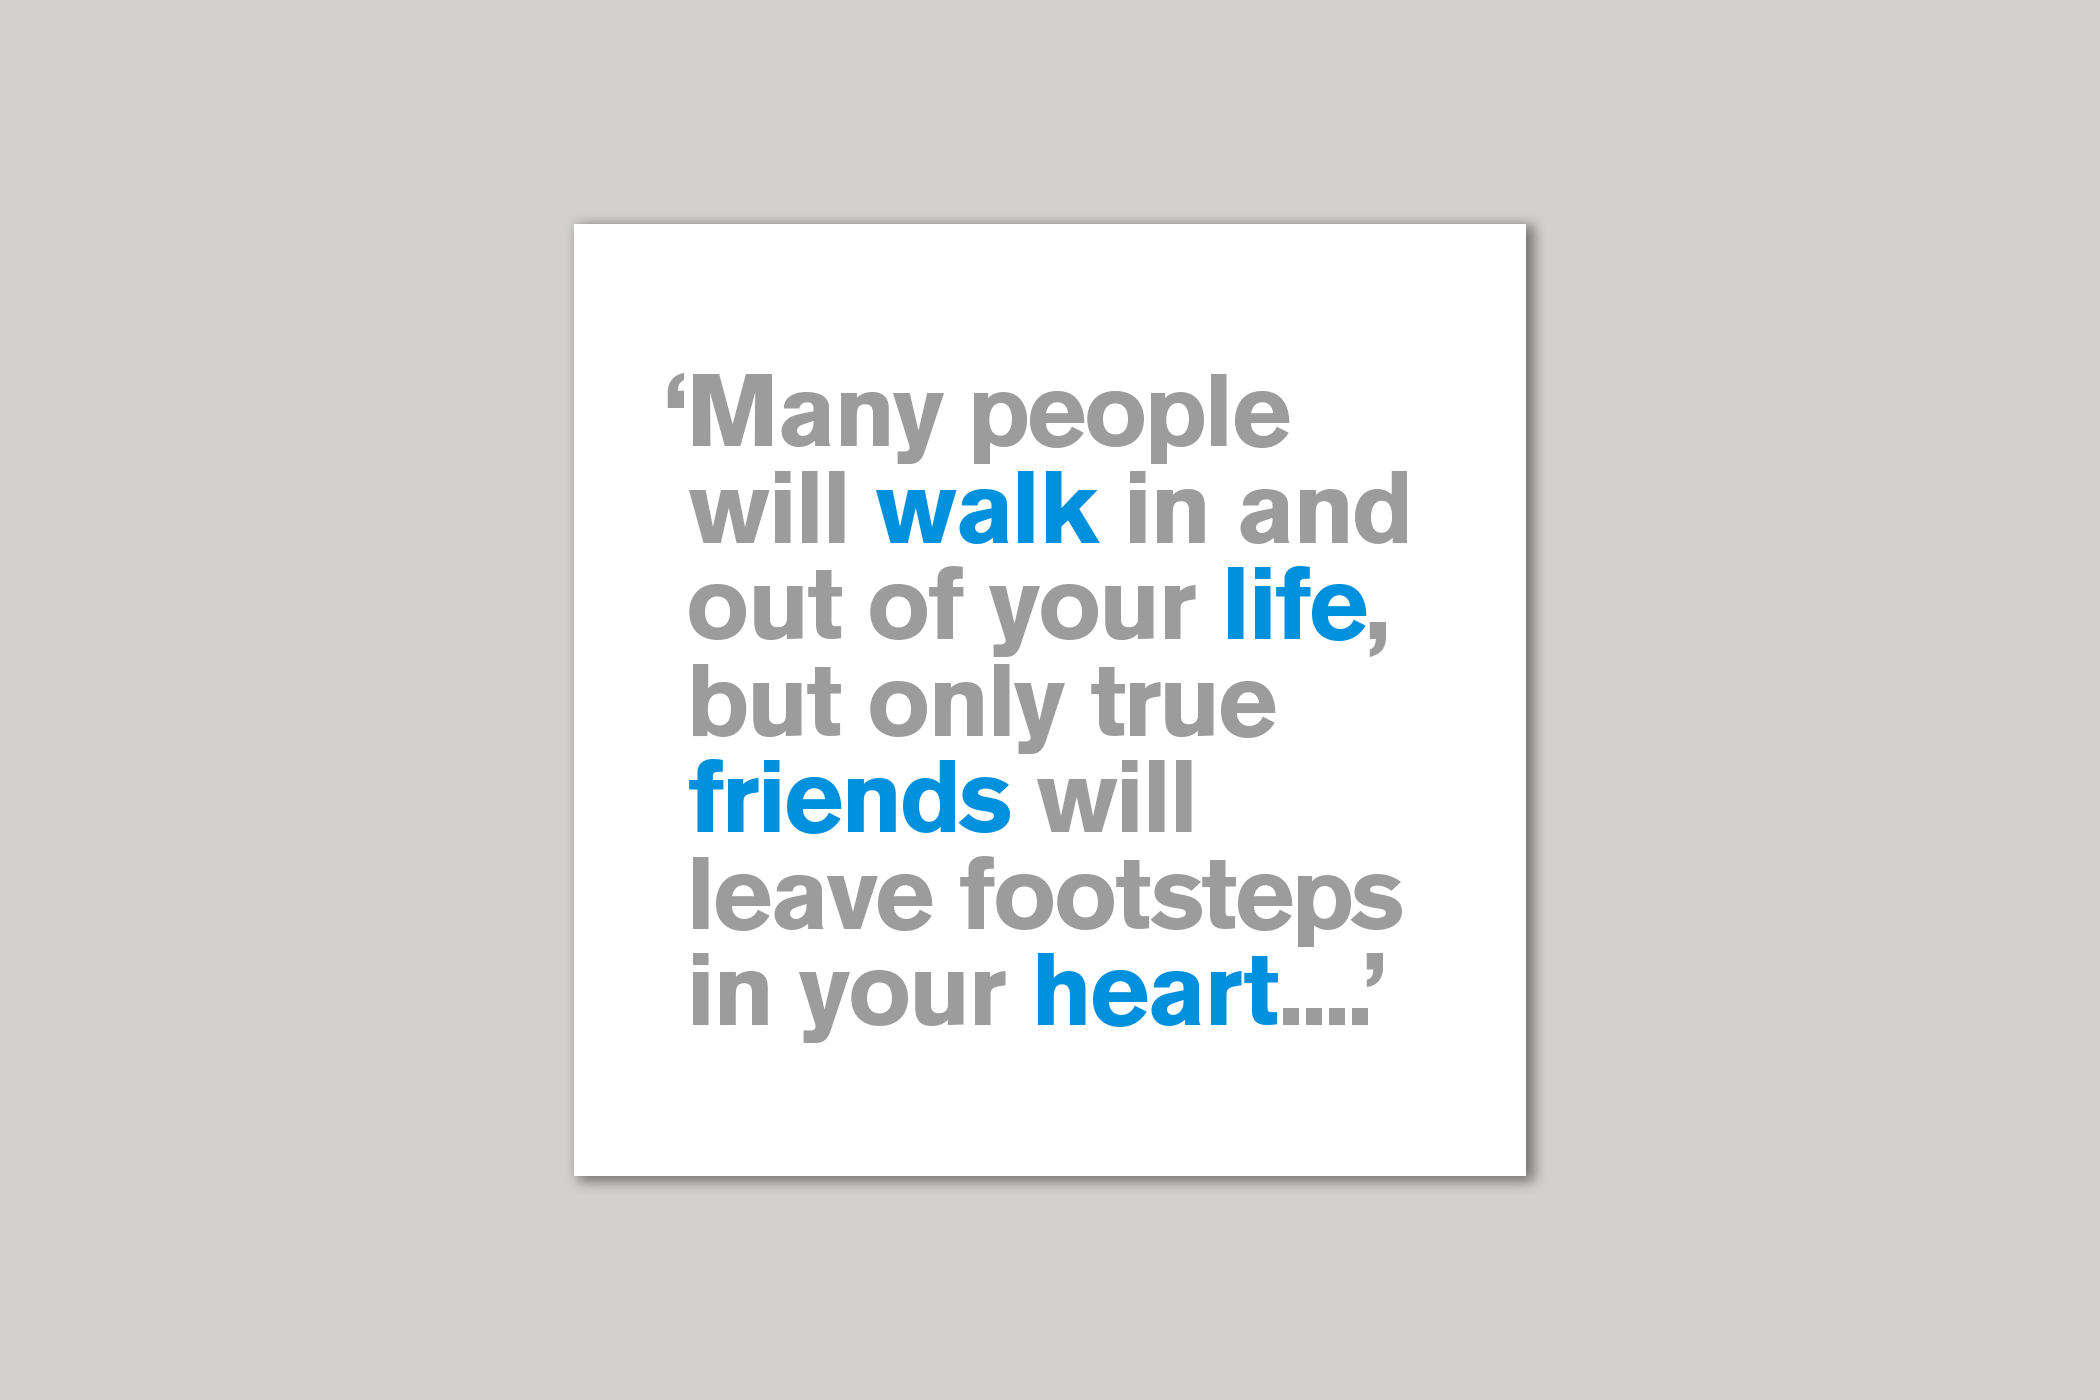 Footsteps in Your Heart from Lyric range of quotation cards by Icon.